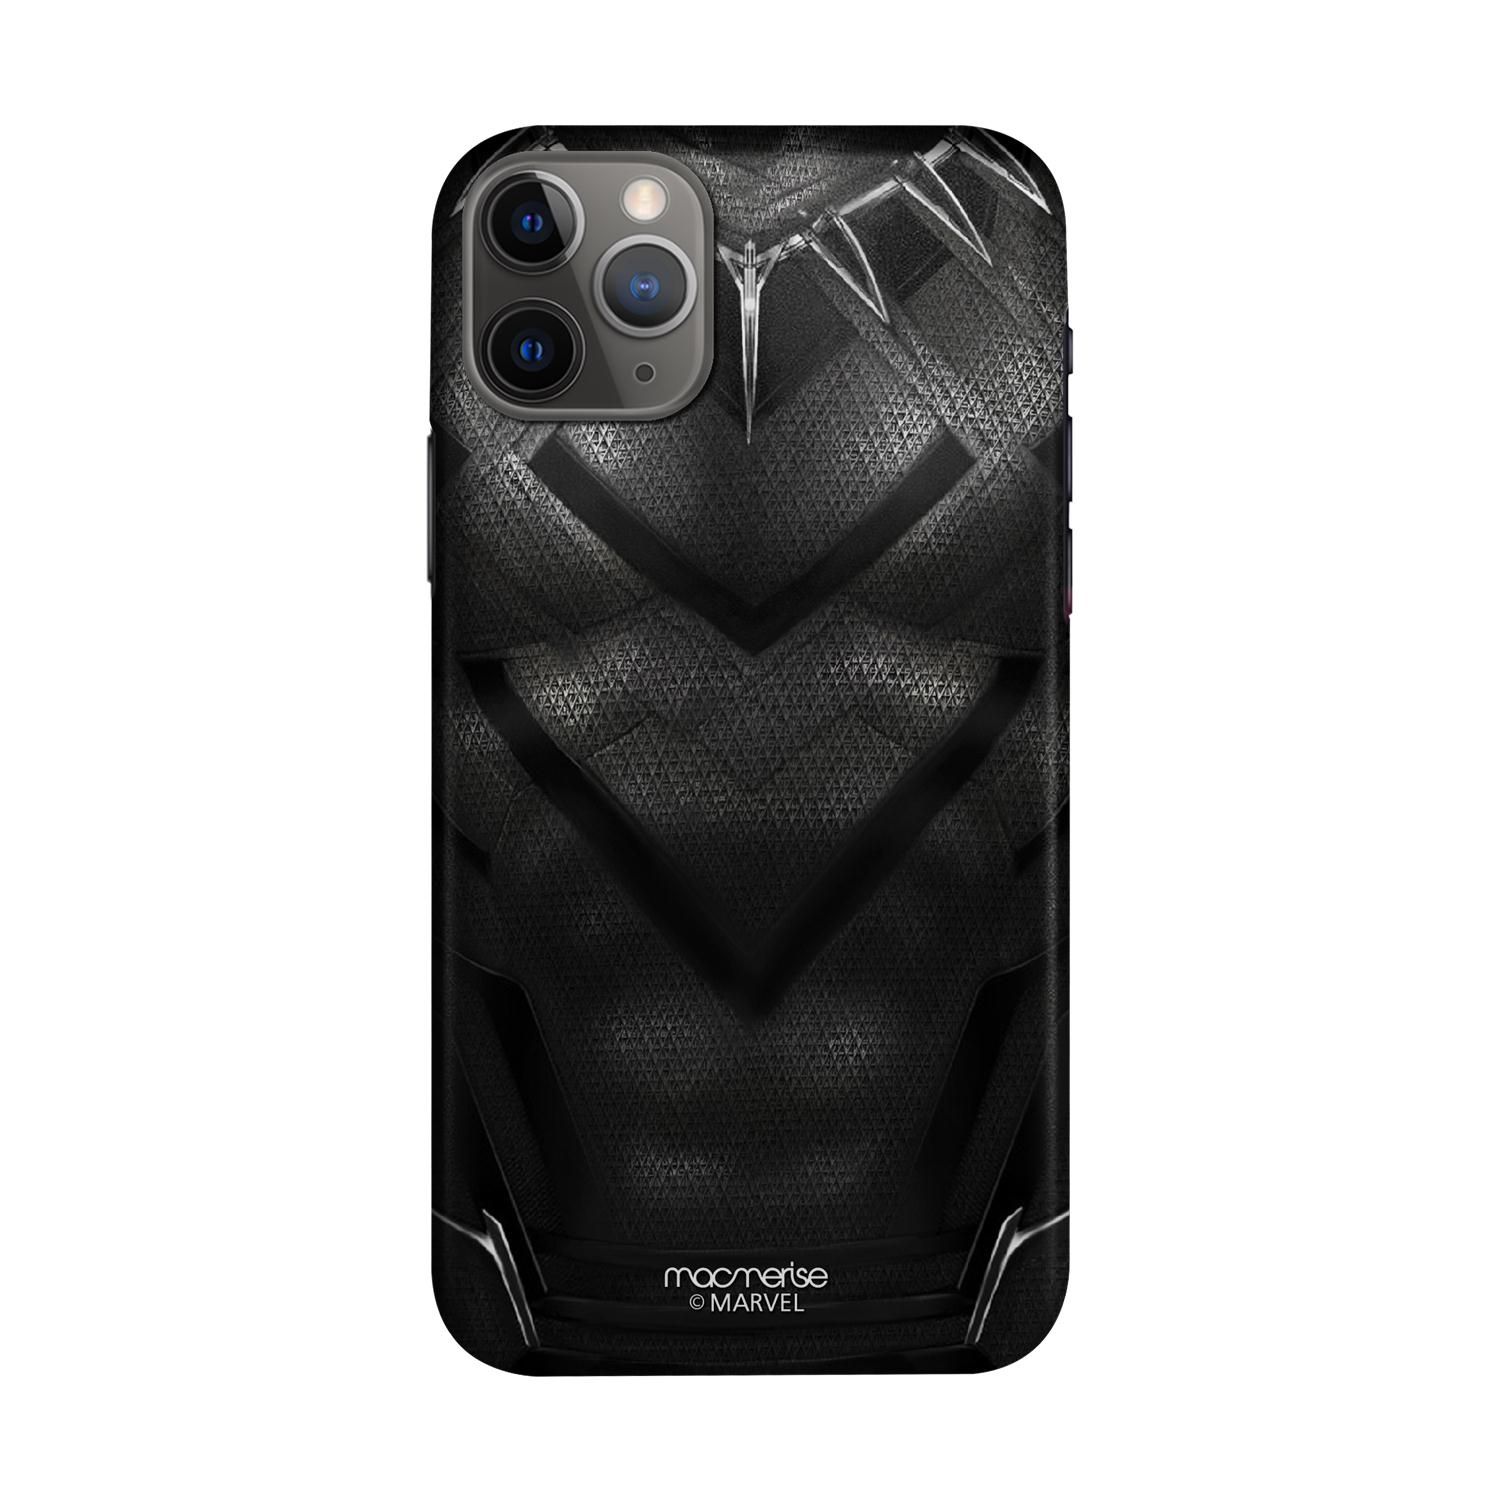 Suit up Black Panther - Sleek Phone Case for iPhone 11 Pro Max